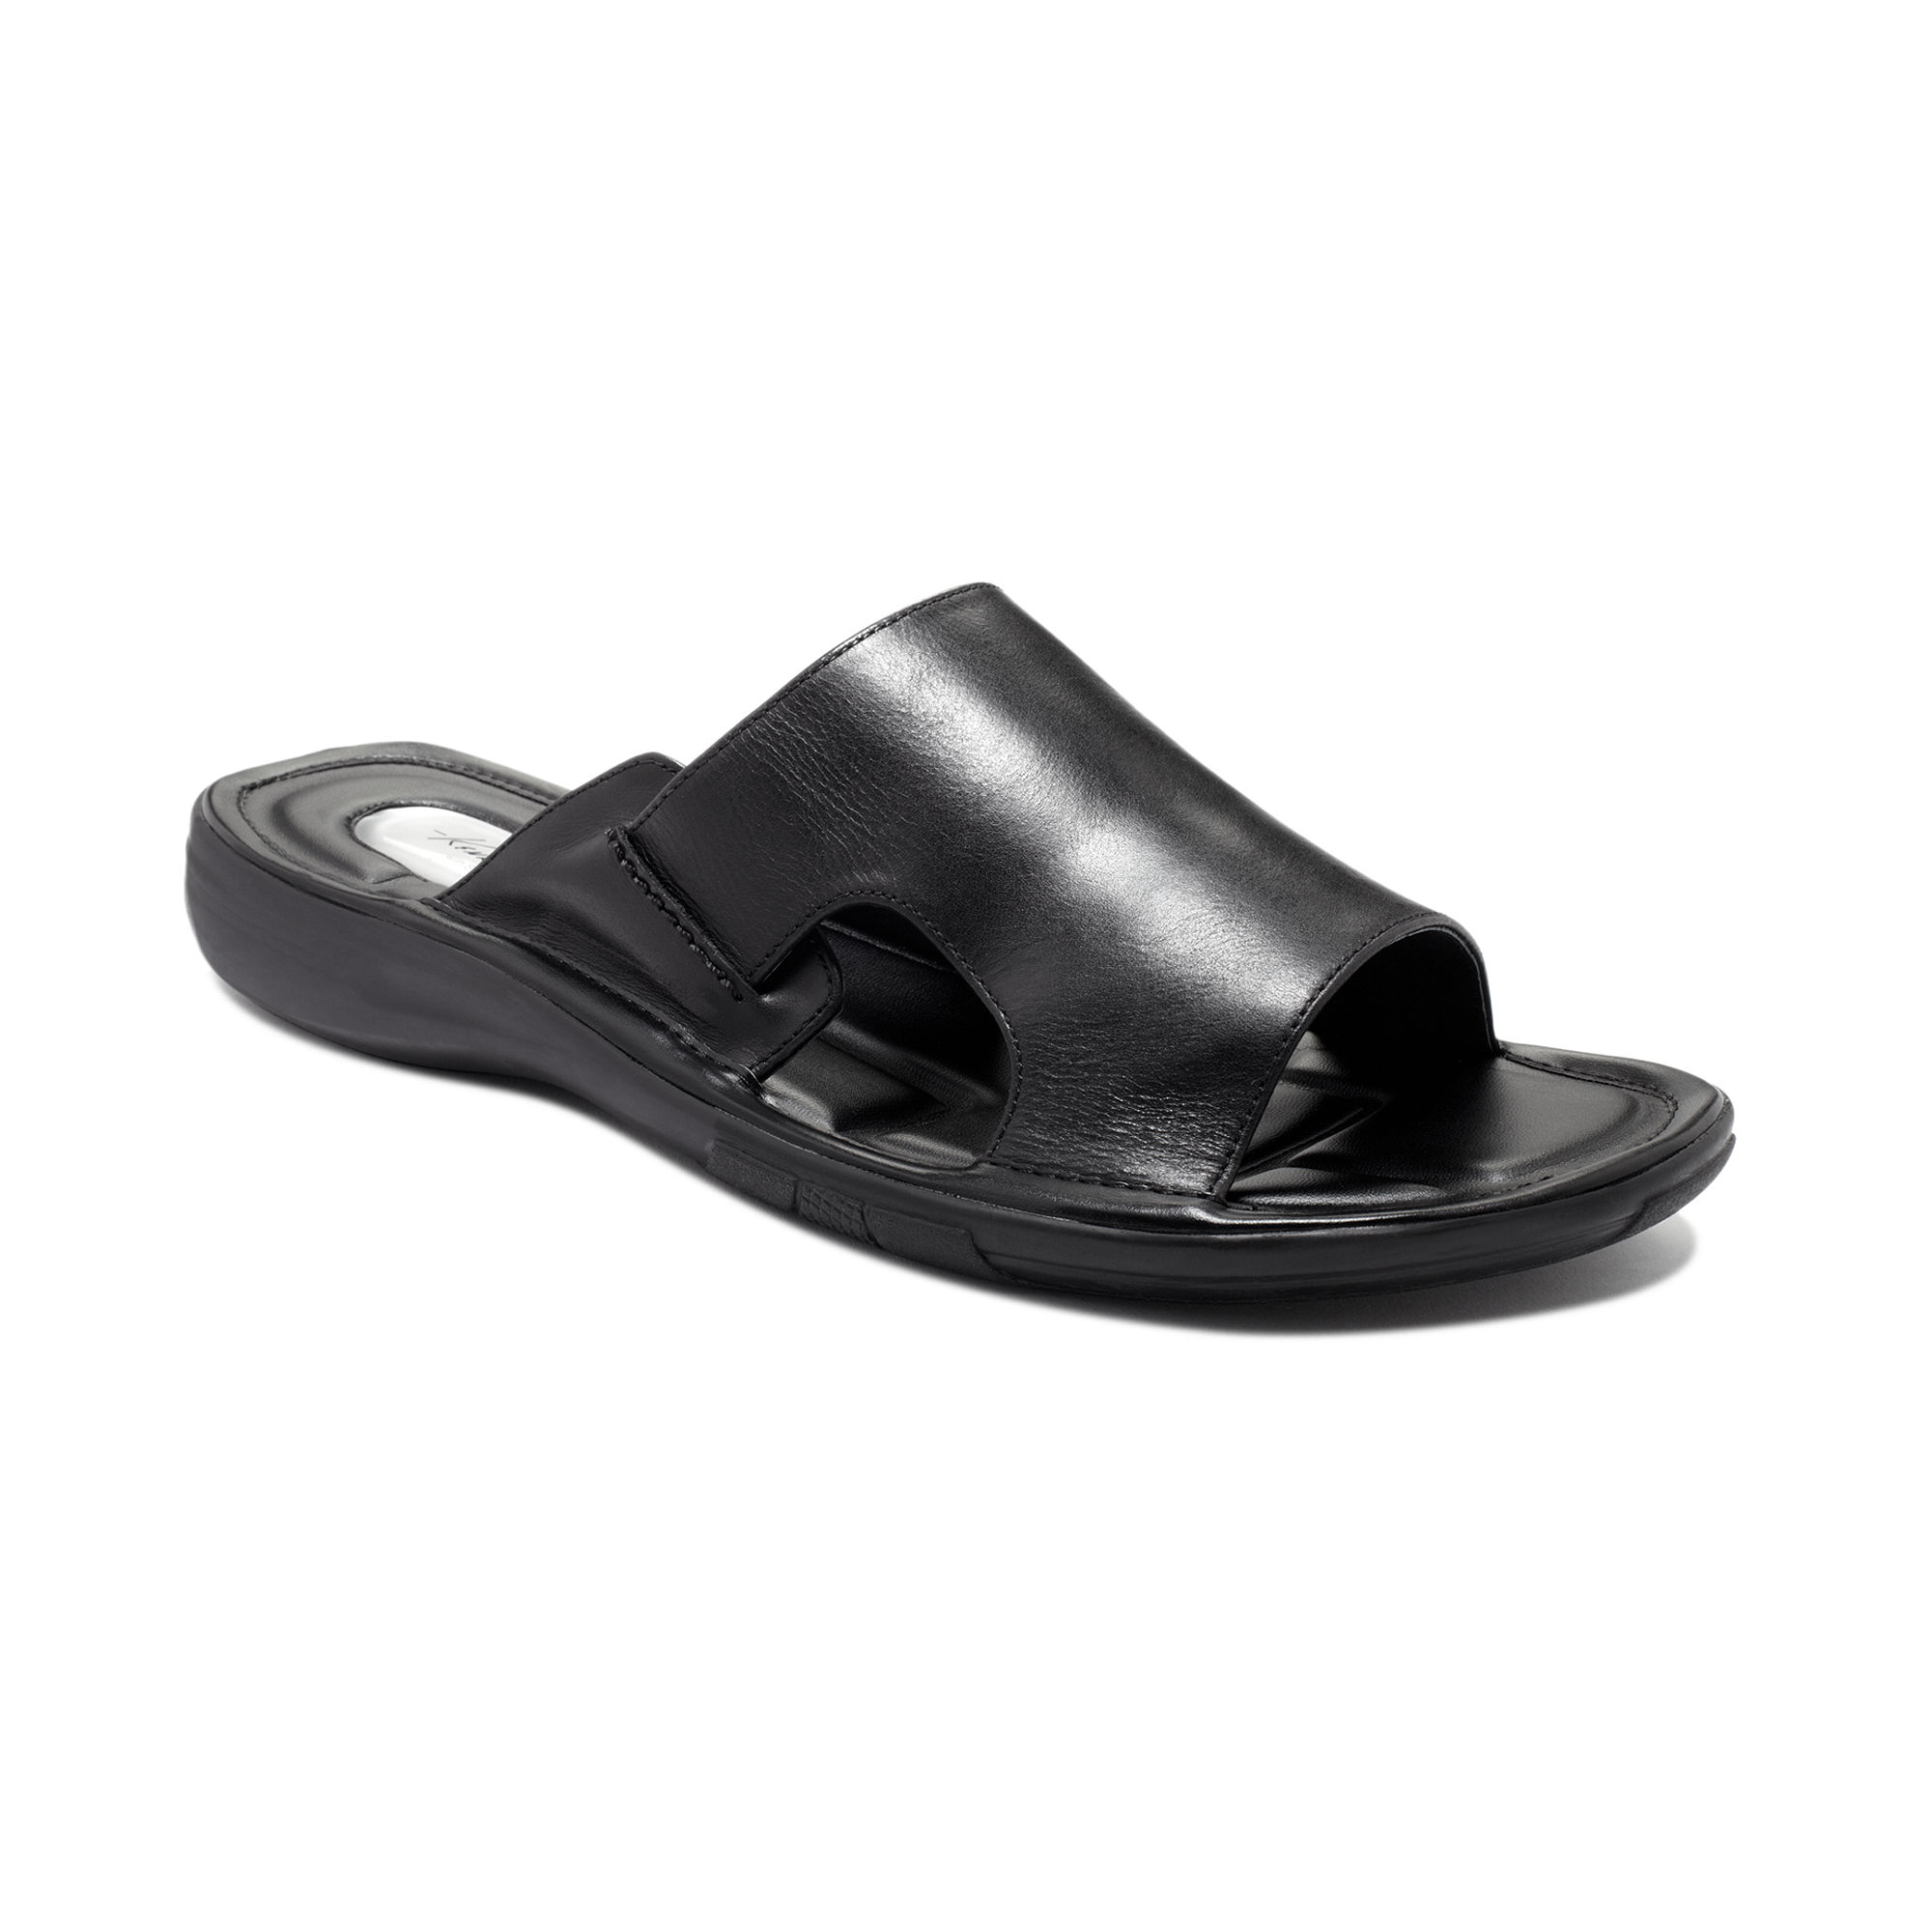 Kenneth cole mens sandals - 28 images - kenneth cole 